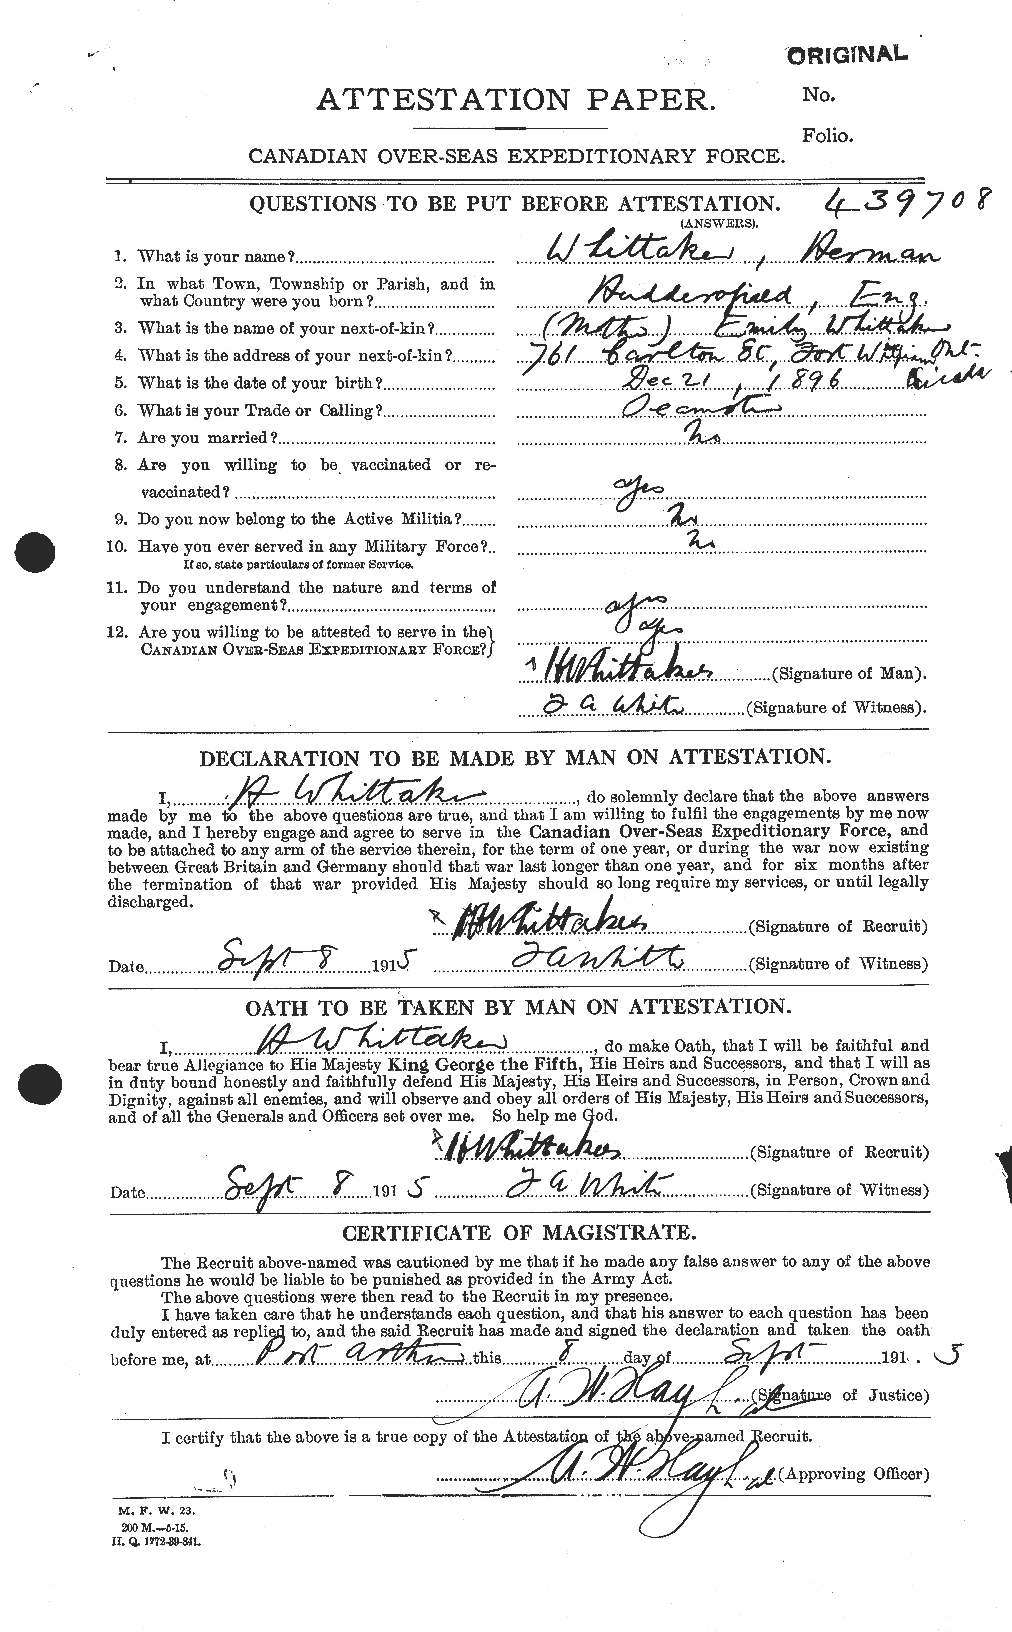 Personnel Records of the First World War - CEF 672858a